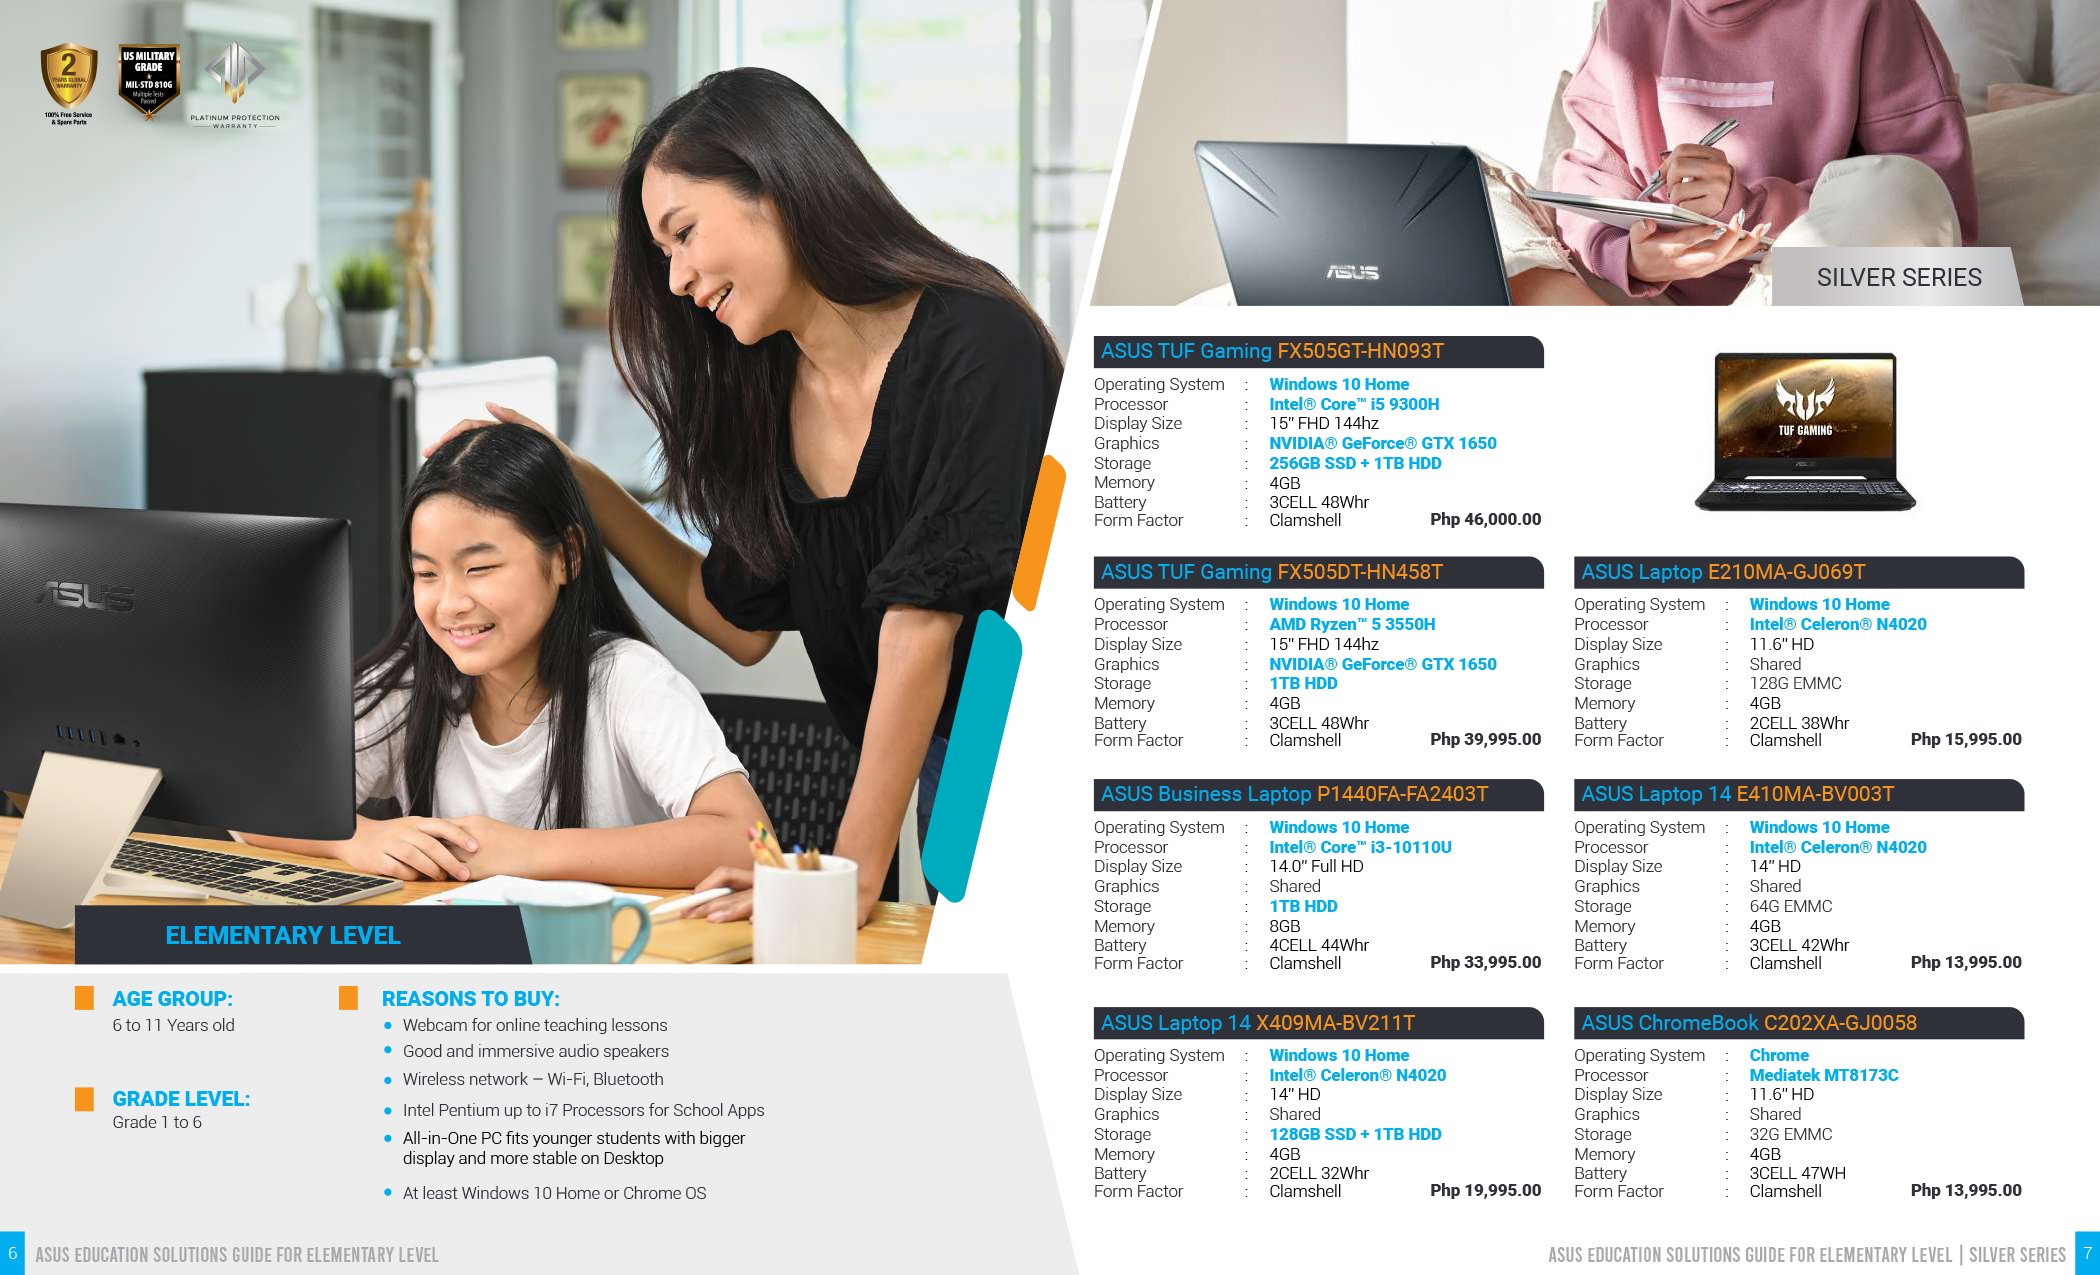 ASUS Education Solutions Guide 5